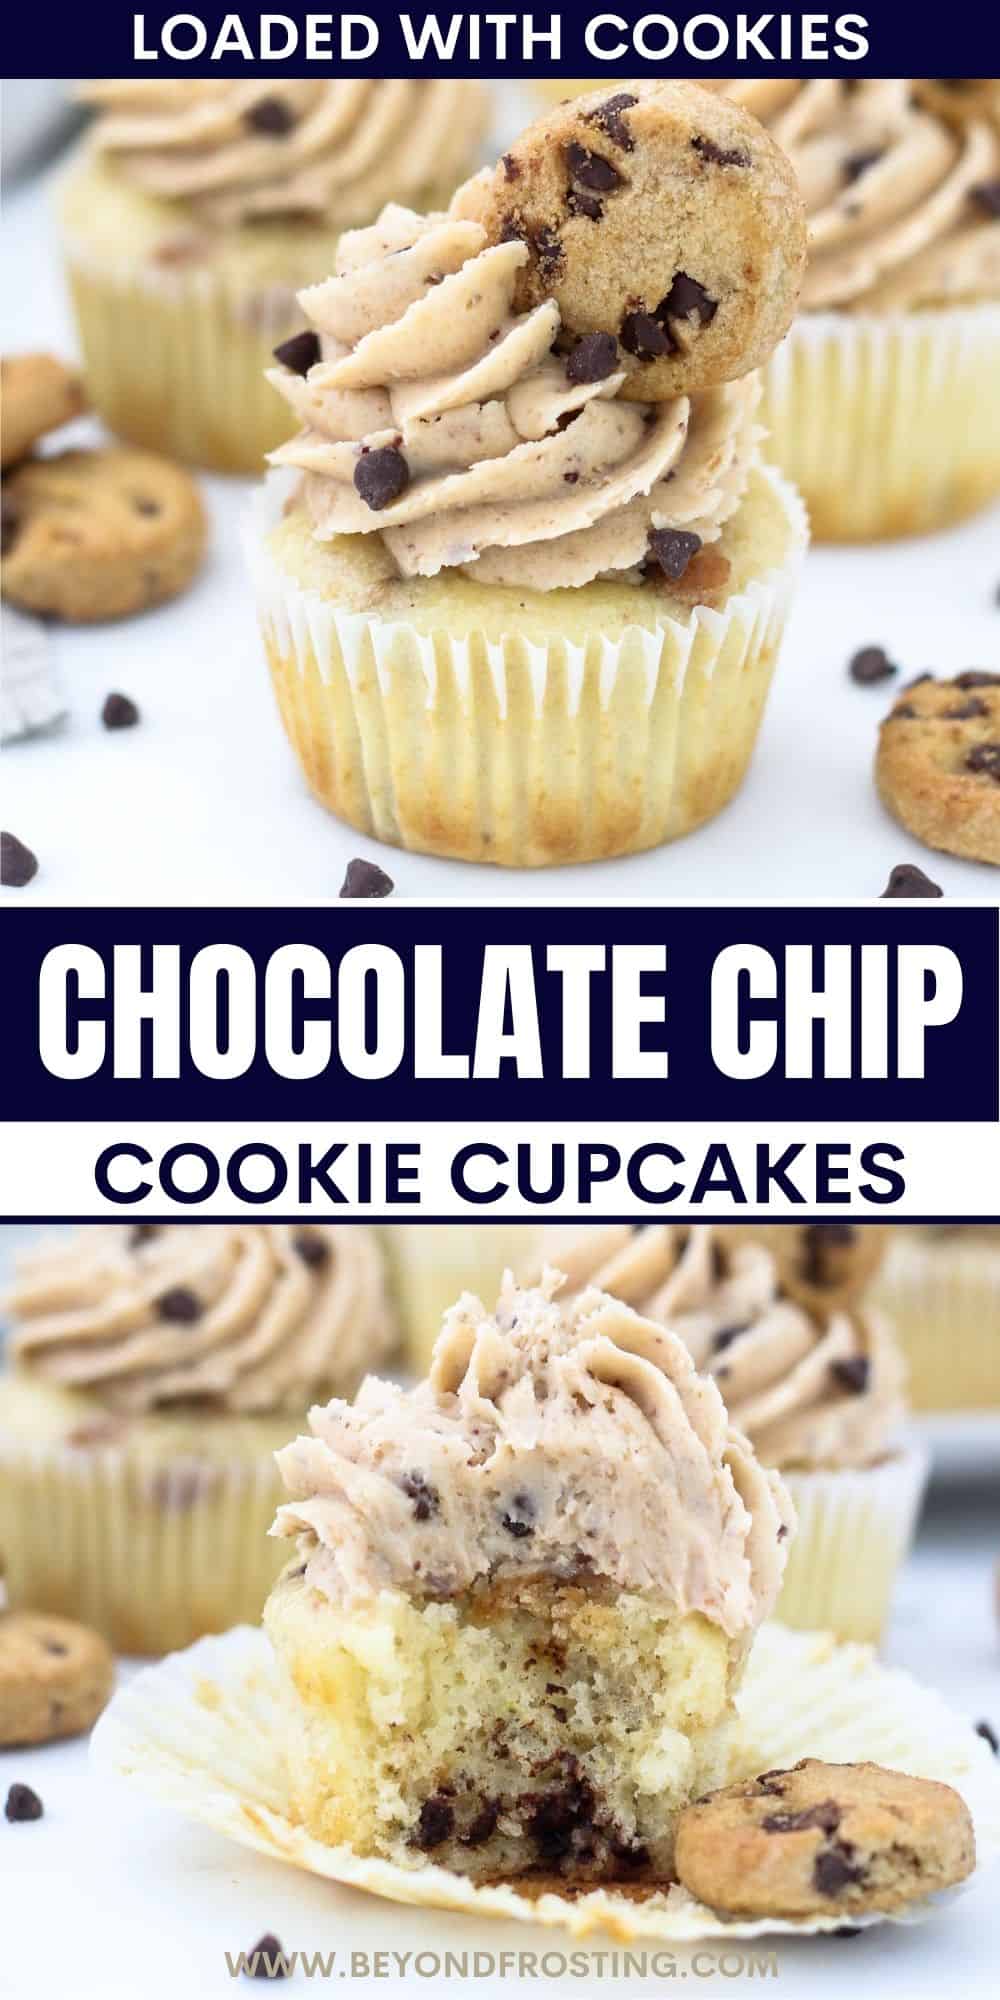 Chocolate Chip Cookie Cupcakes - Beyond Frosting